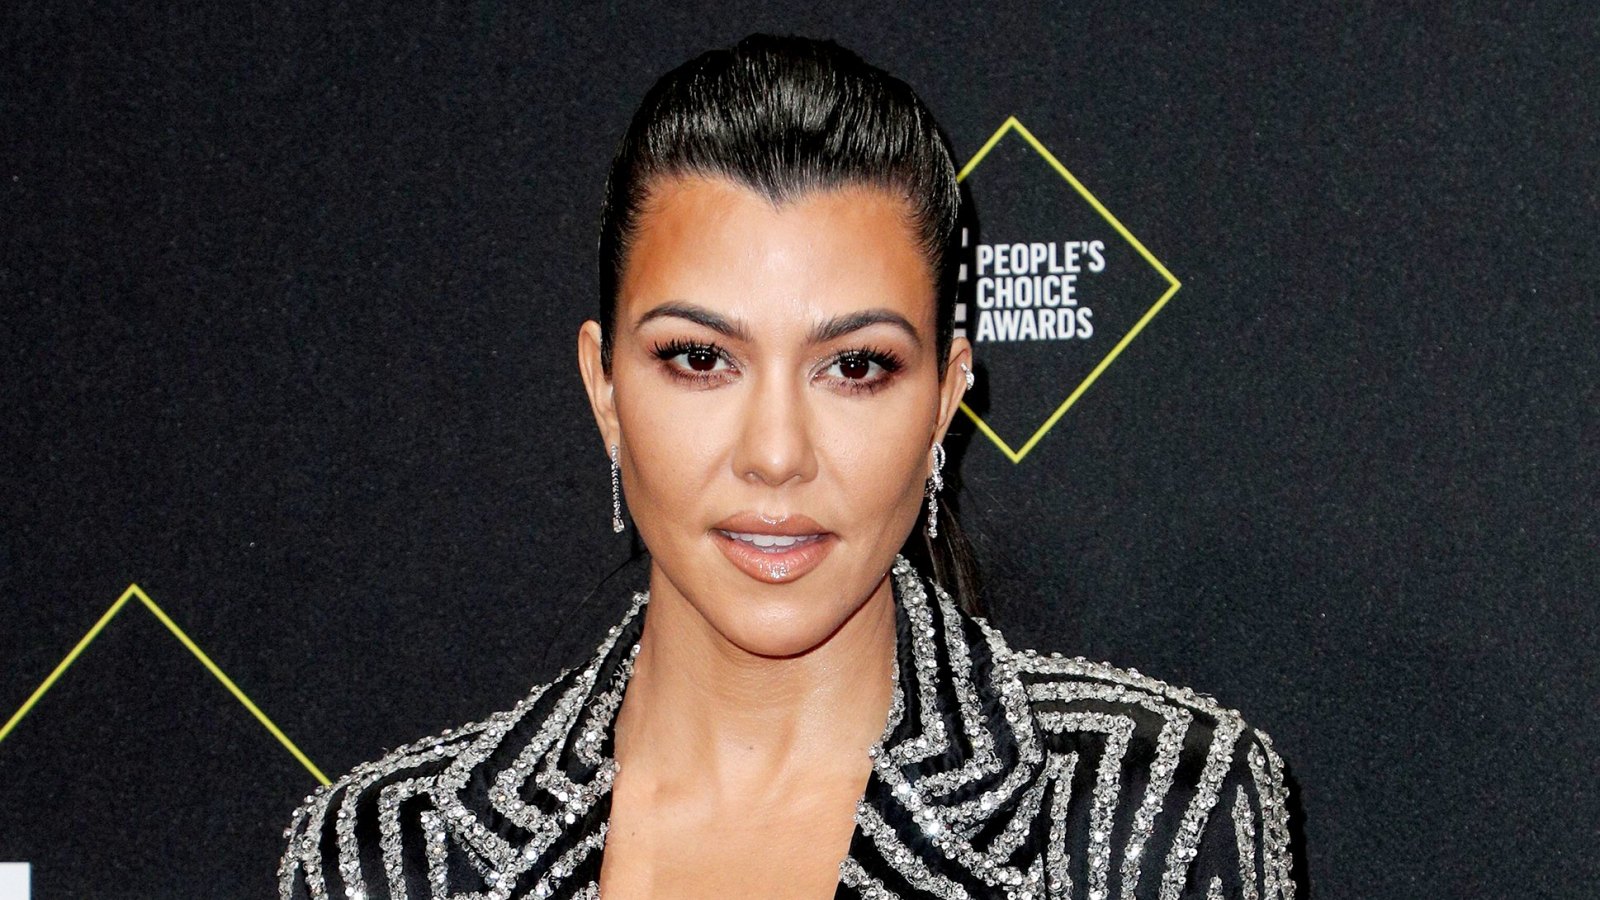 Kourtney Kardashian Responds to Claims Her Kids Can't Eat Candy